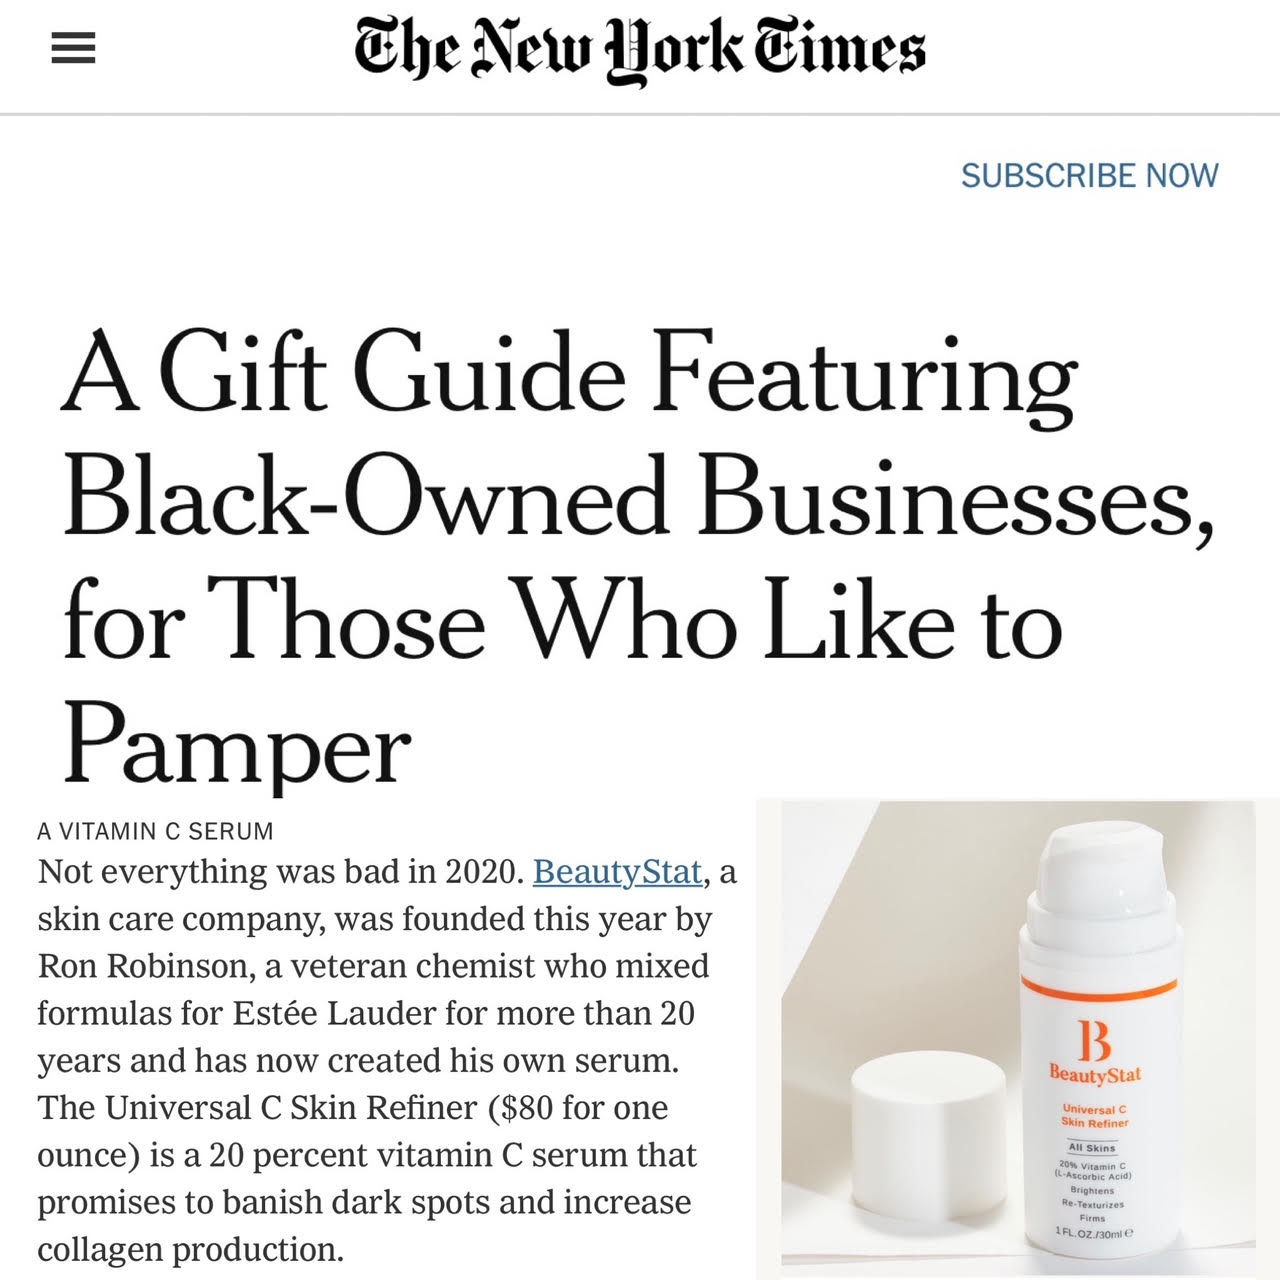 NY Times Names Universal C Skin Refiner As Best Skincare Holiday Gift Idea